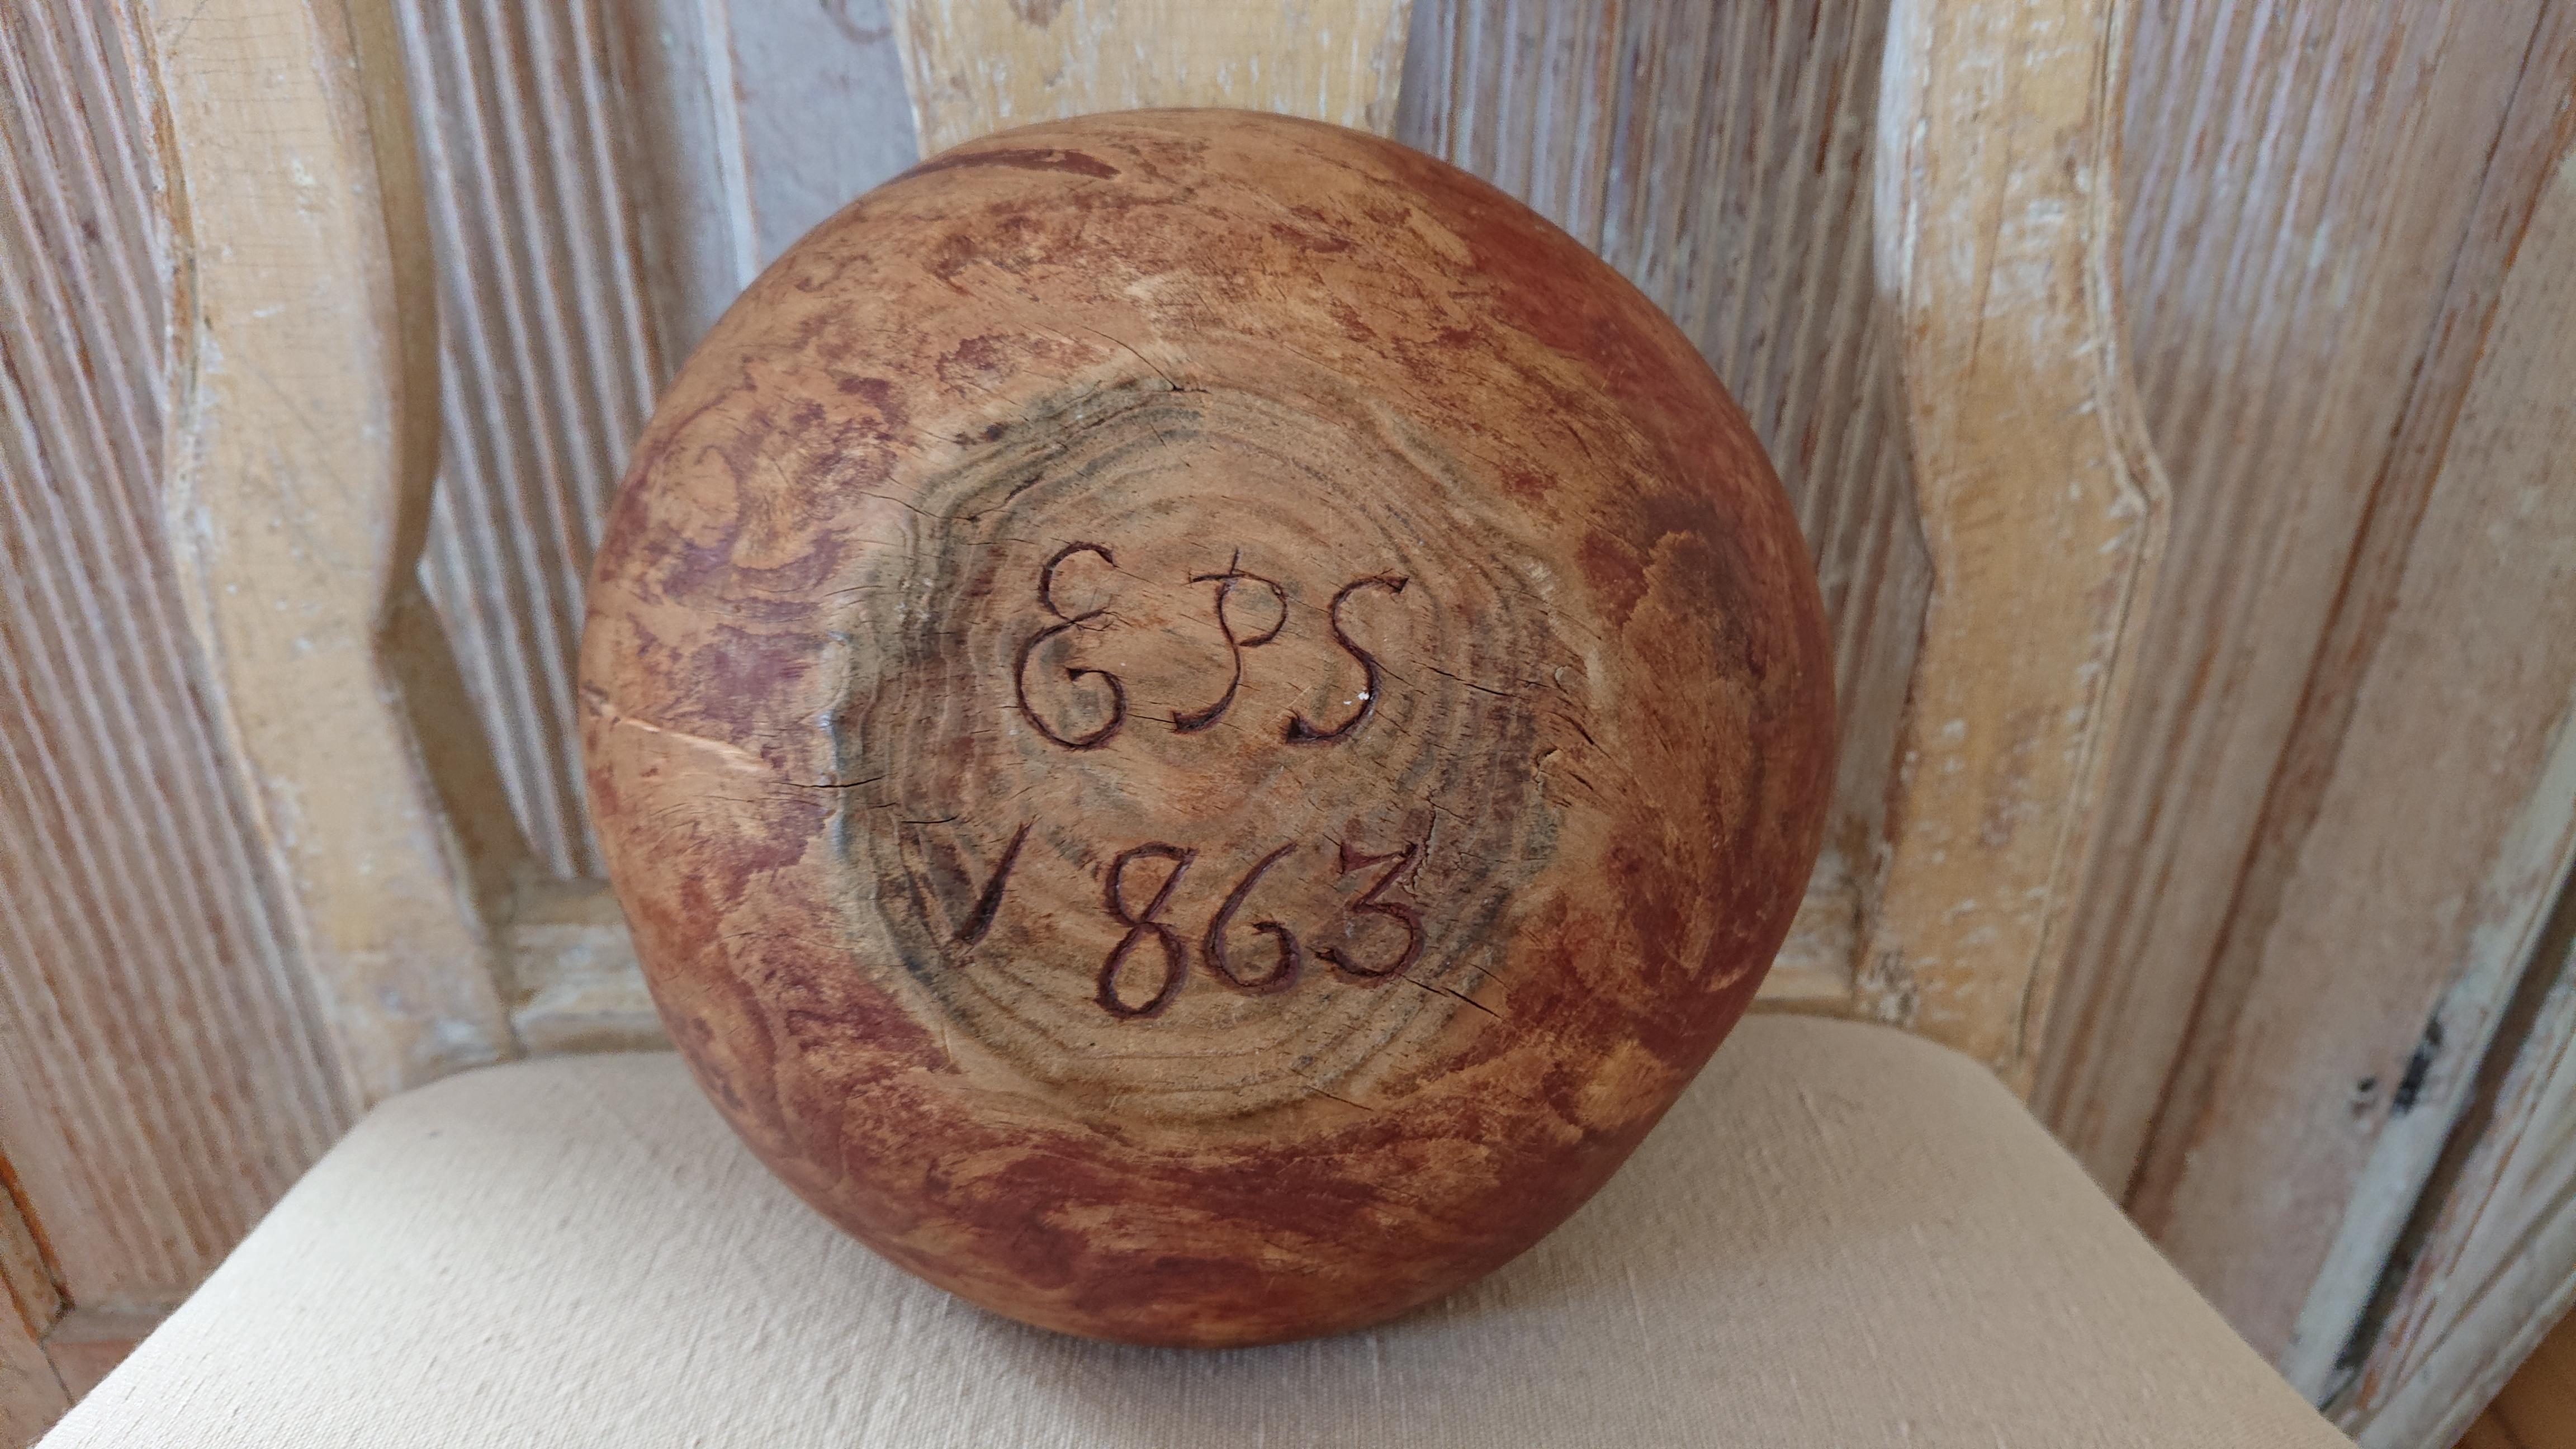 19th century Swedish folk Art wooden bowl dated 1863 Signed EPS.
A stunning antique organic wooden bowl with lovely patina & trace originalpaint.
You can see the use of time.
The bowl has ownershipmarking below (EPS).
The bowl is made of